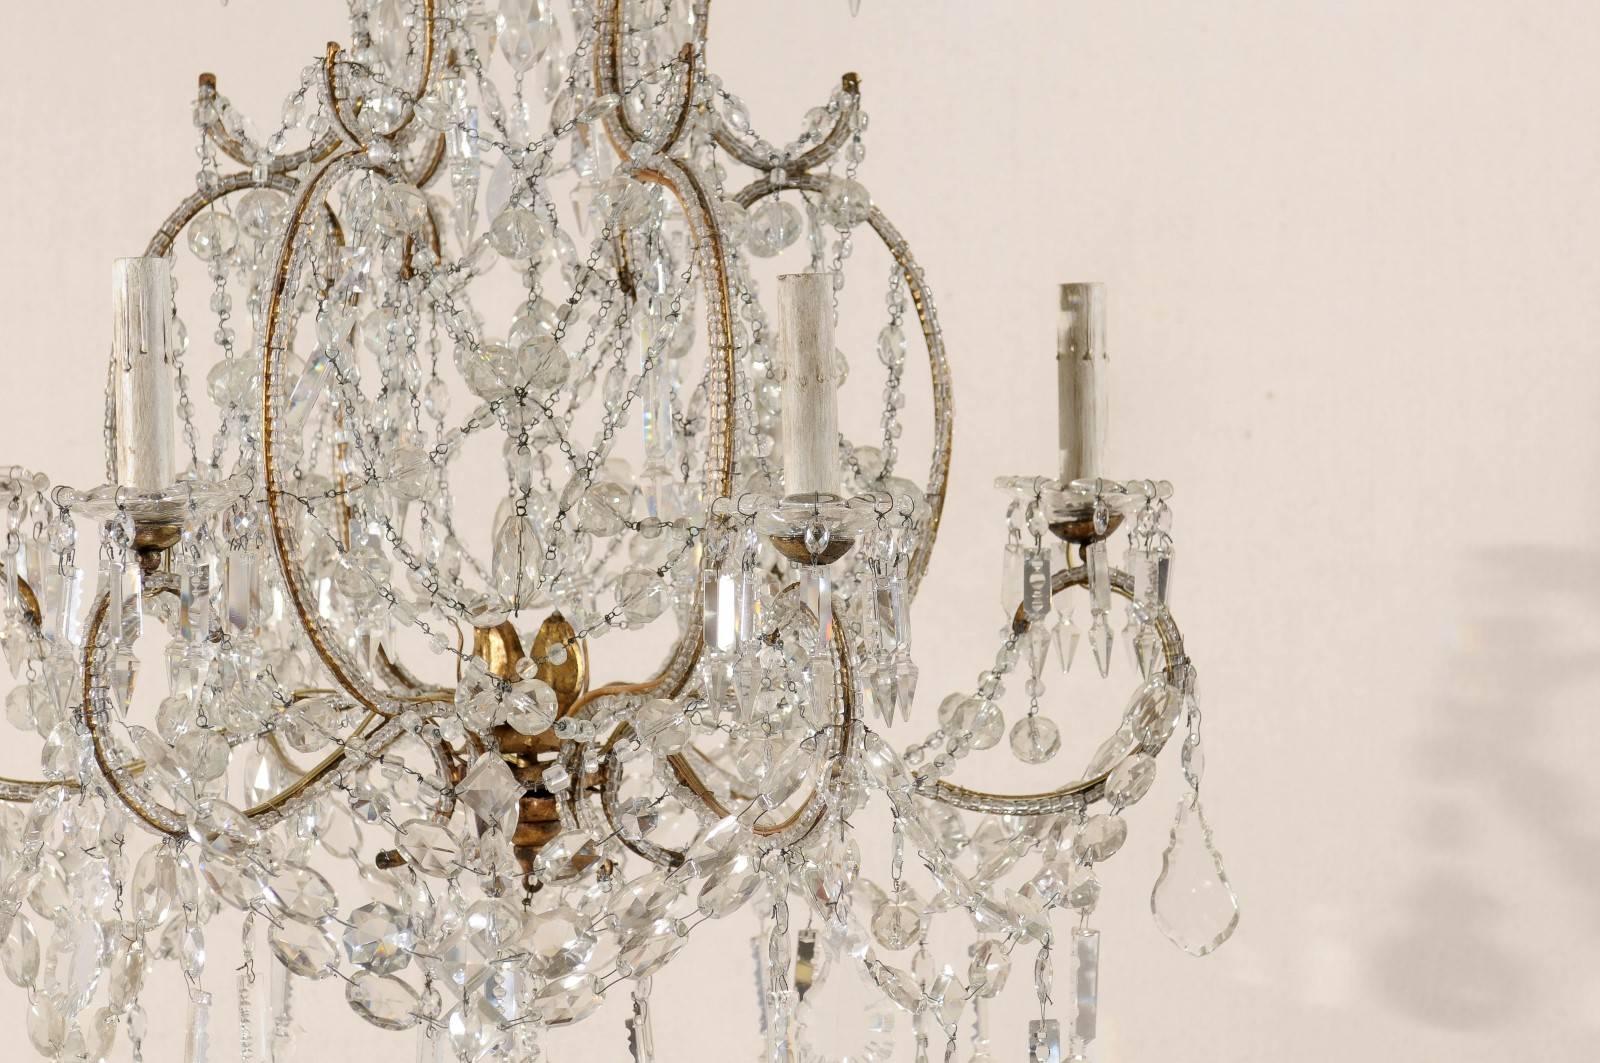 French Crystal and Gilded Iron Chandelier with Scroll Arms and Ornate Beading 1